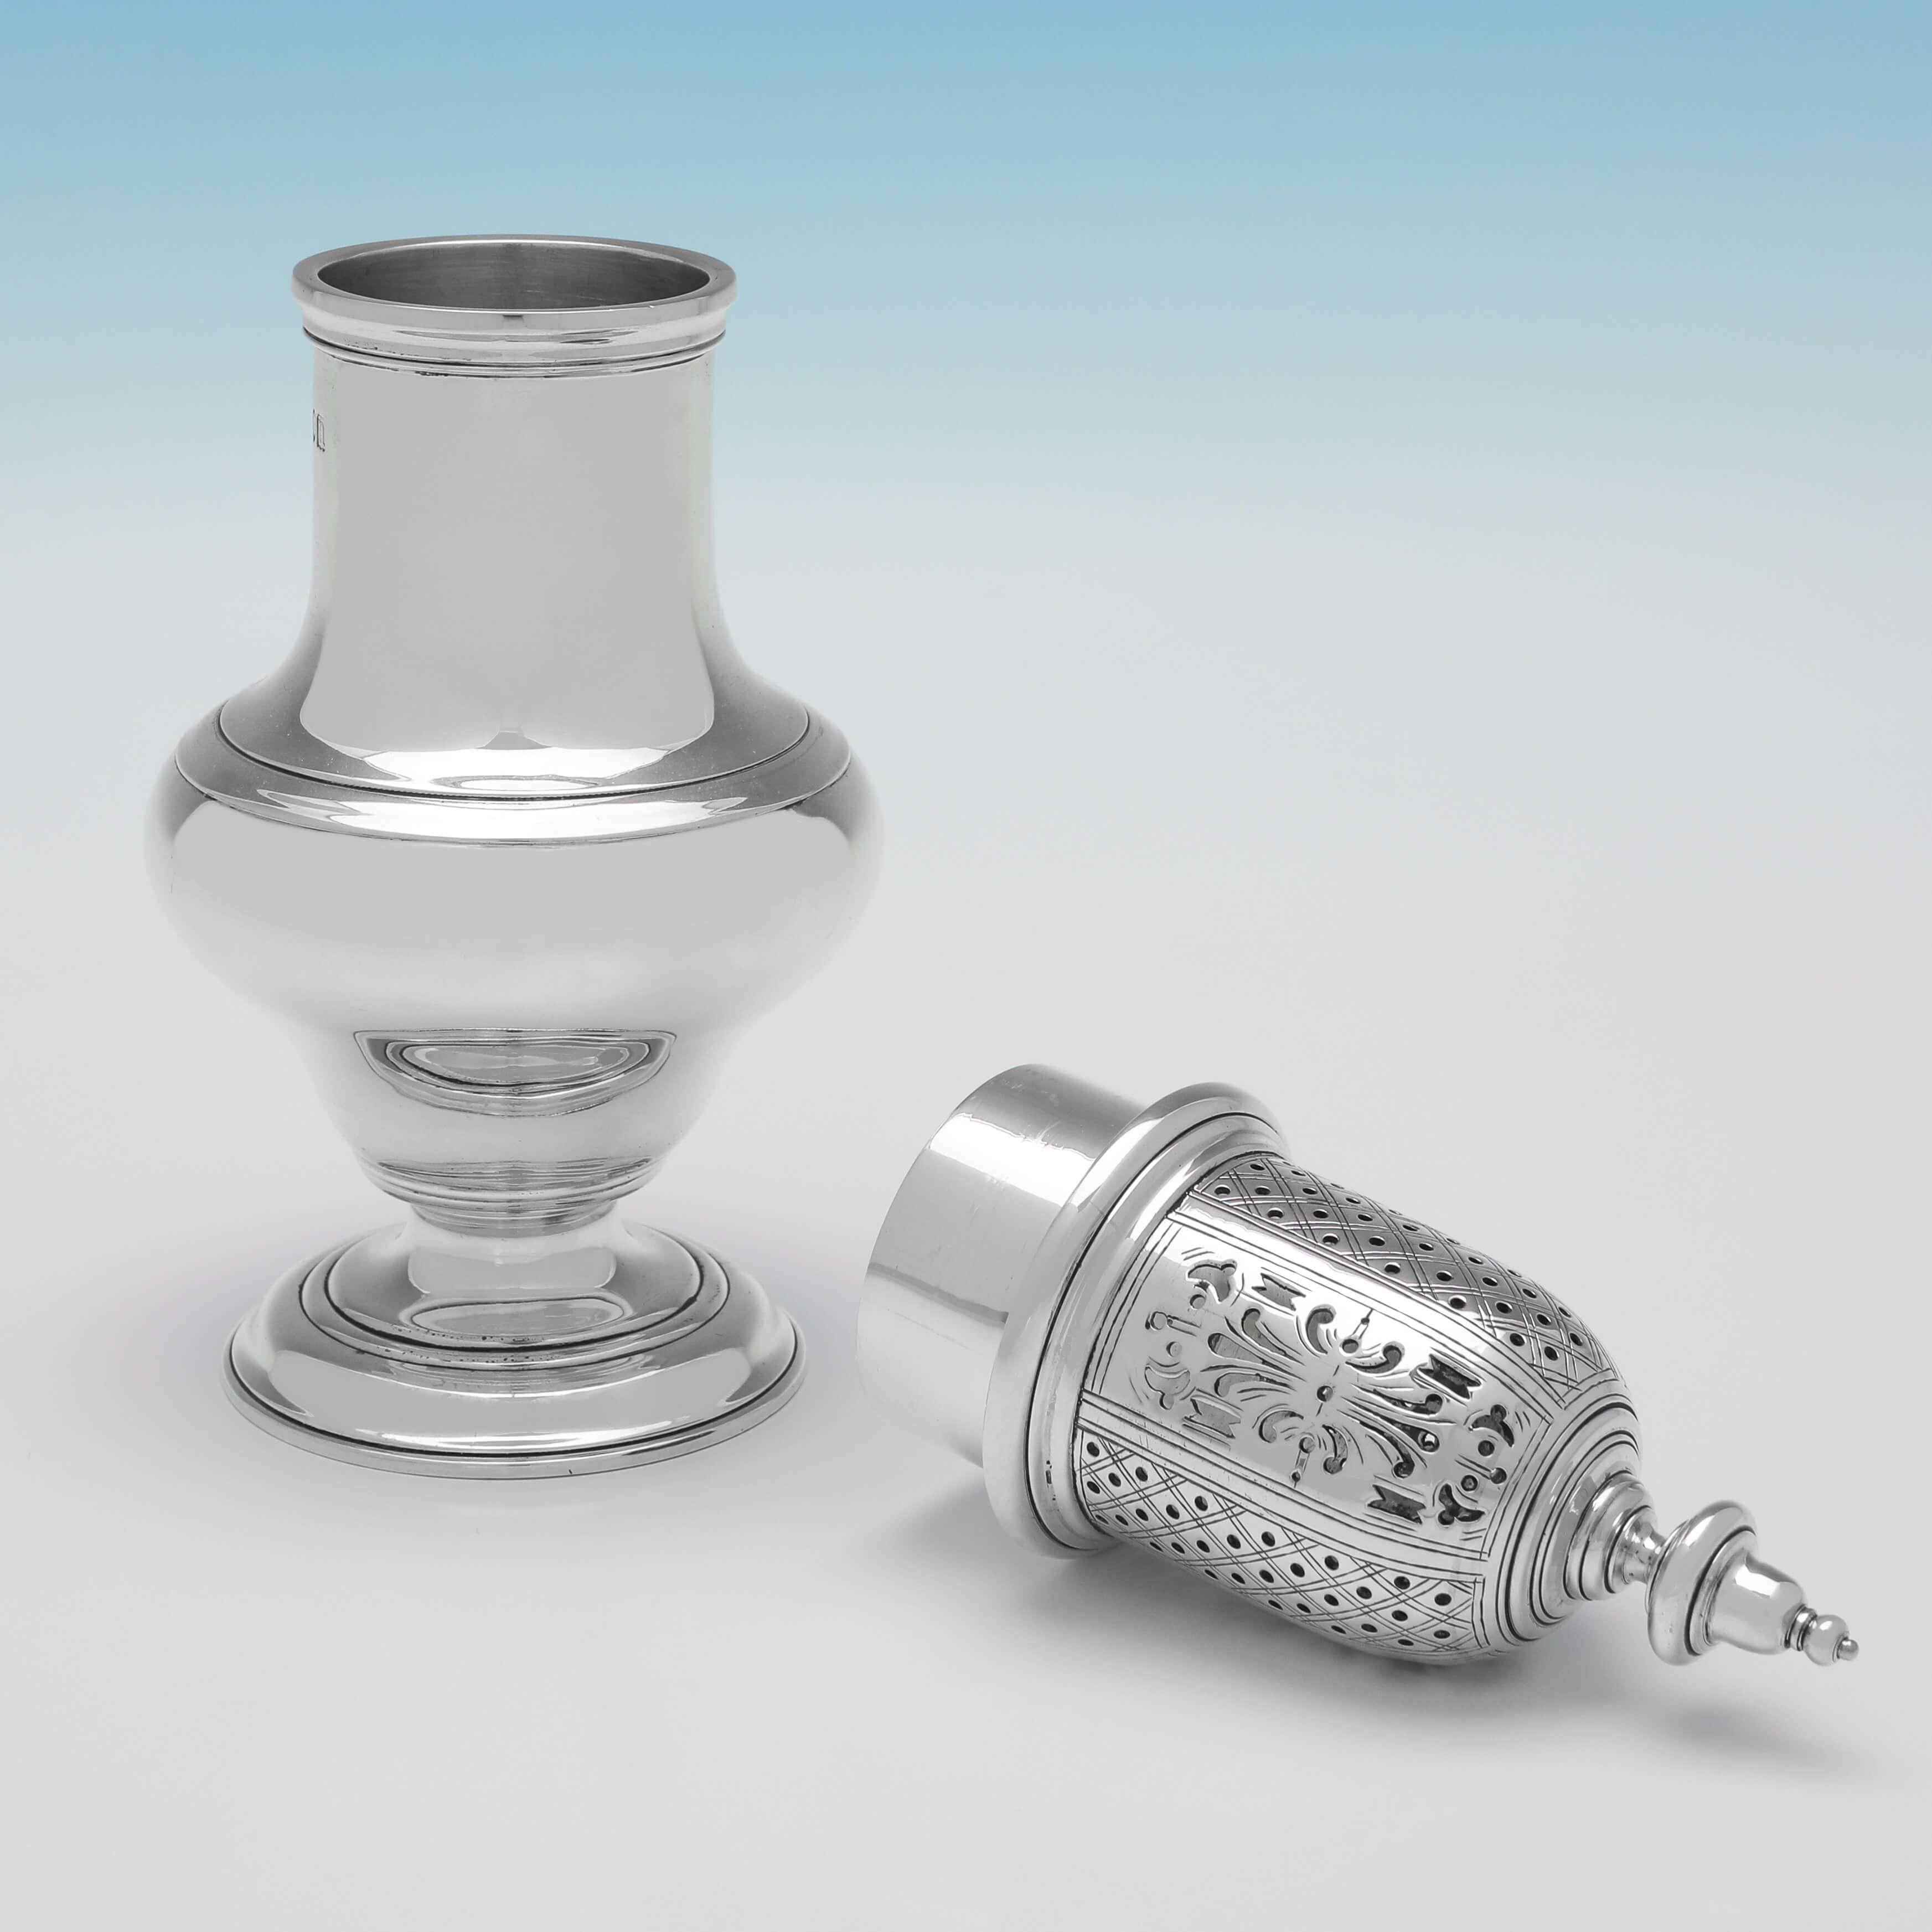 English Pair of Antique Sterling Silver Sugar Casters, 1908 & 1911 by J. Parkes & Co. For Sale